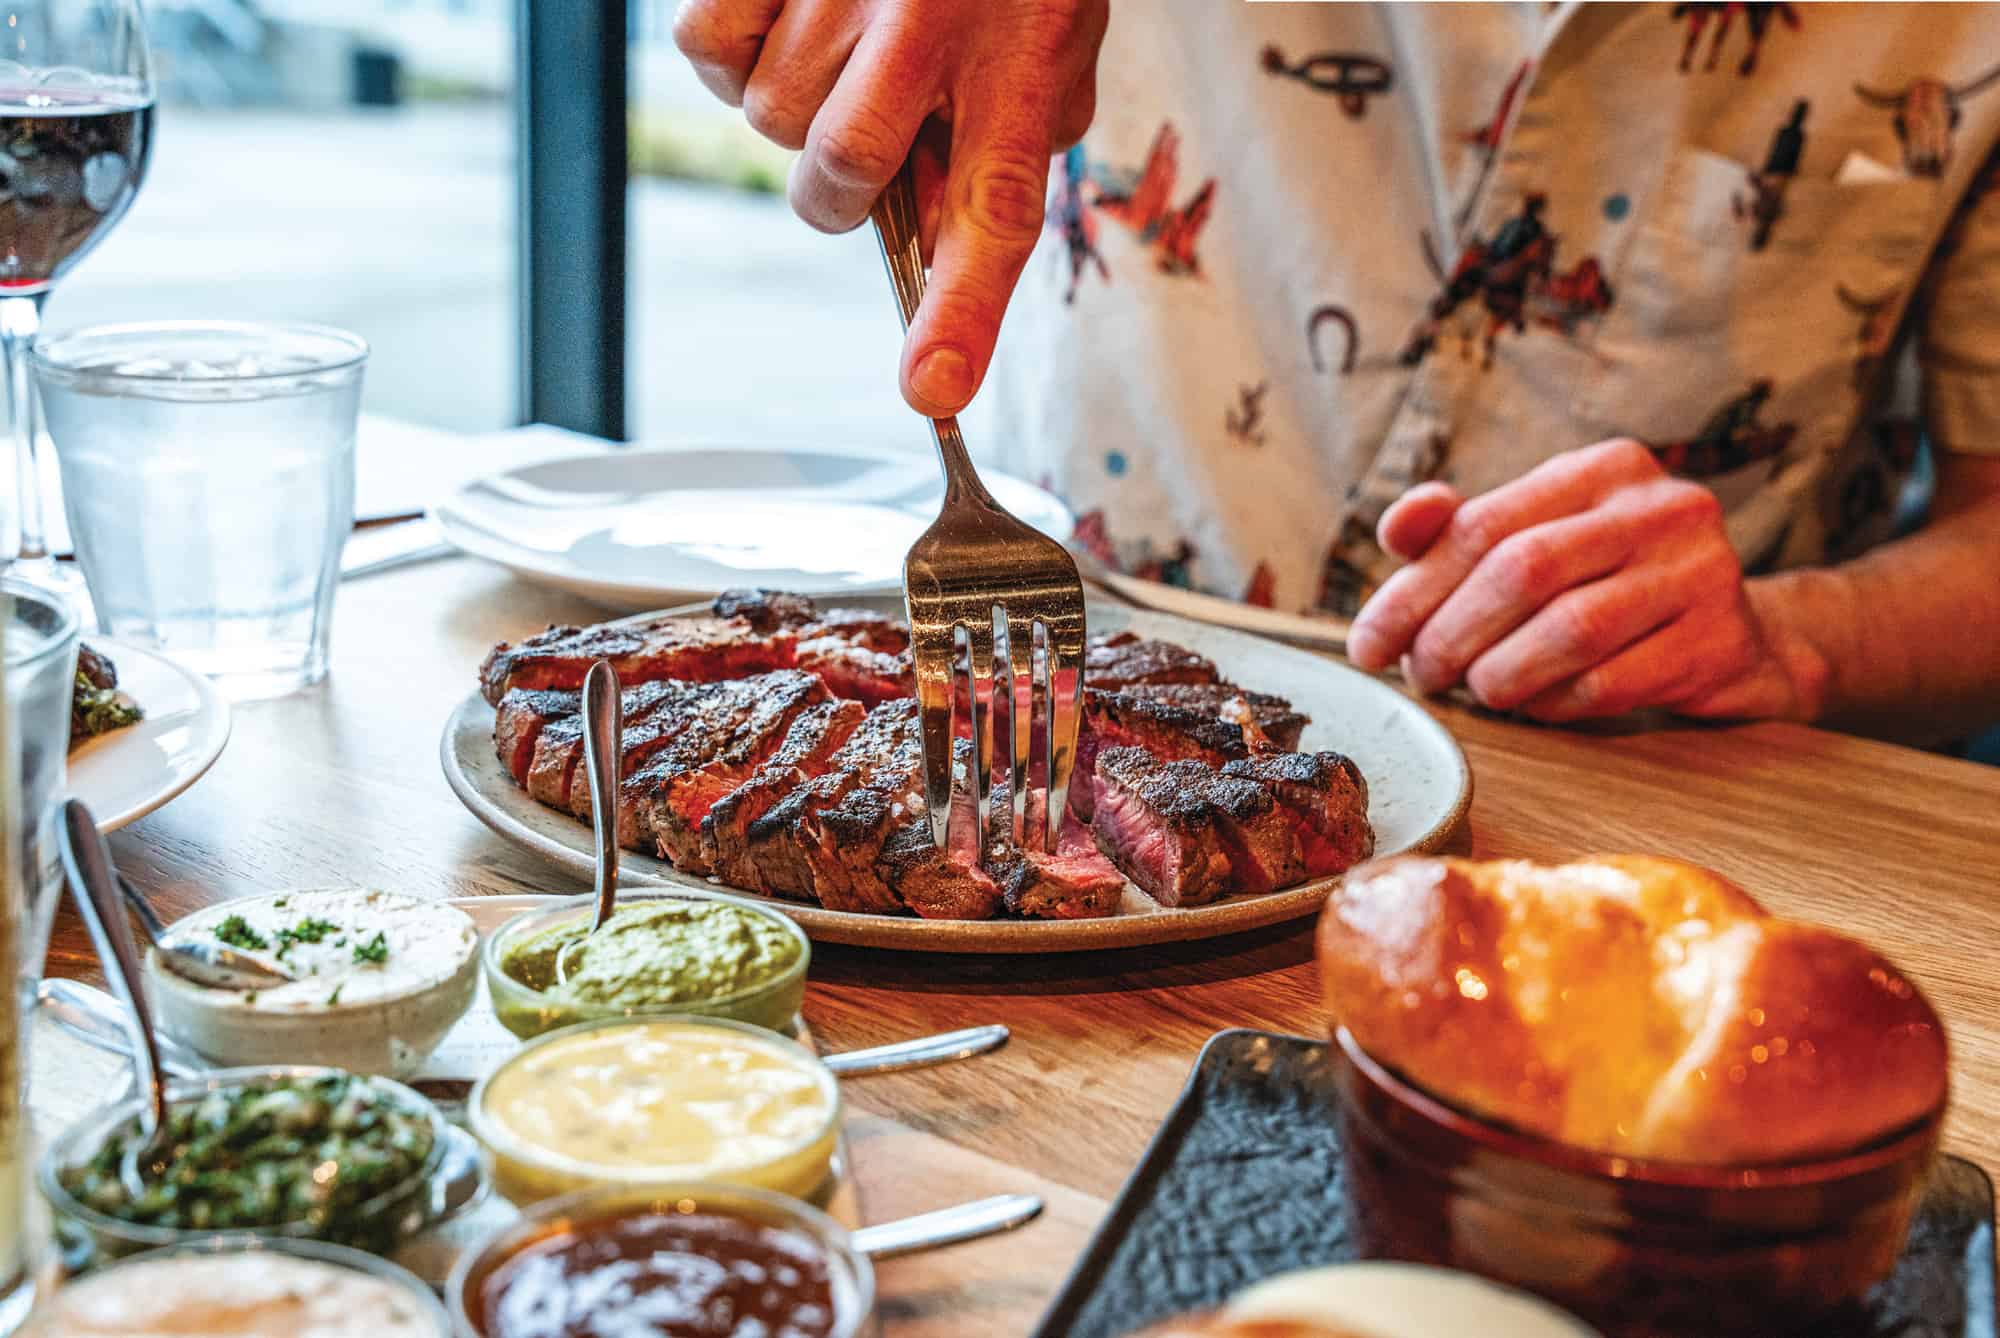 Rancher Butcher Chef serves steaks and elegance in NorthWest Crossing.